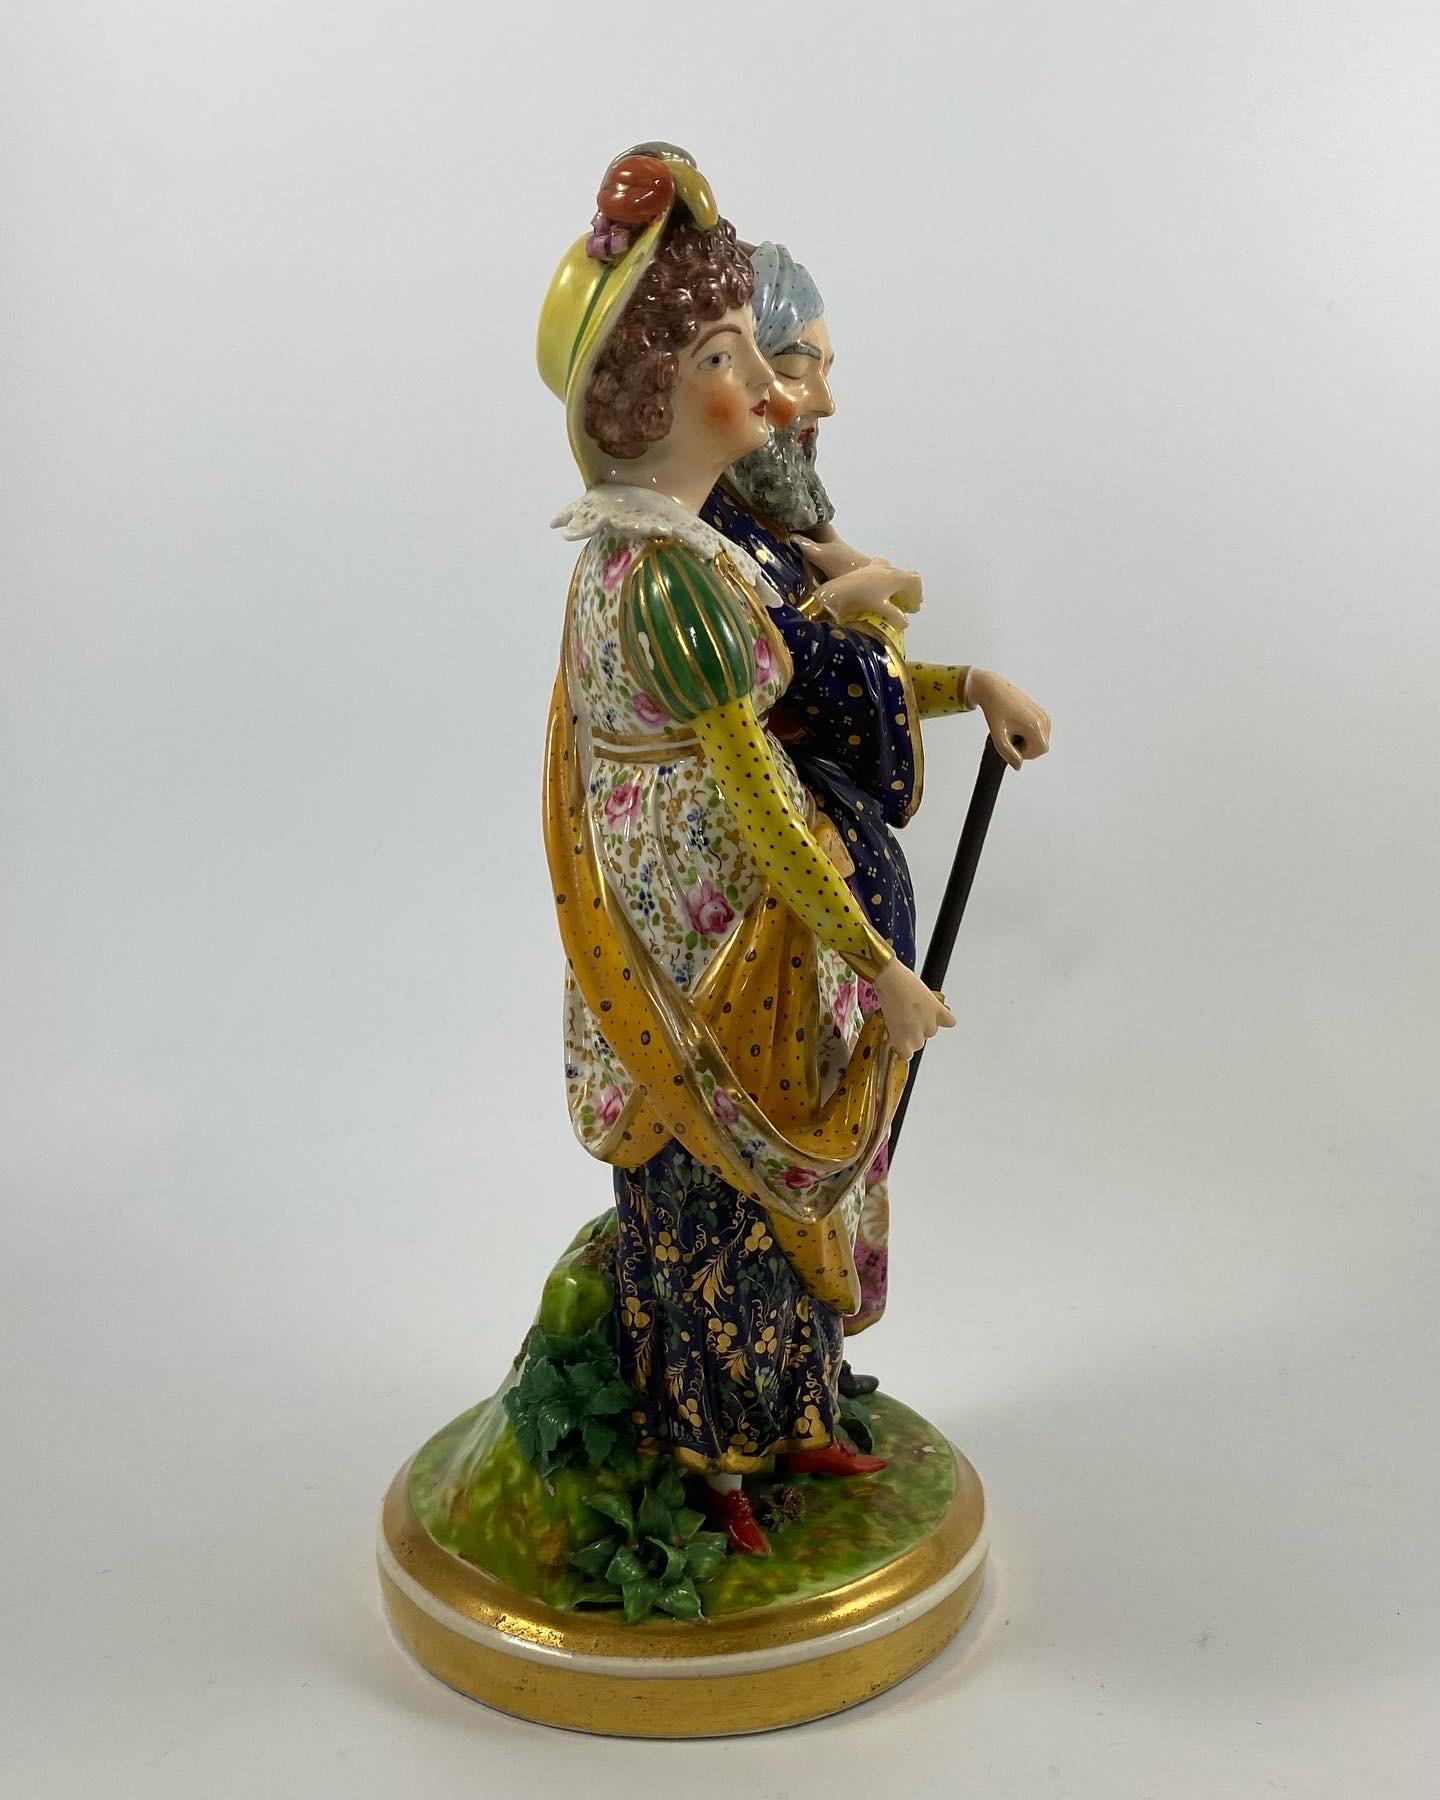 A rare Derby porcelain figure of Belisarius and his daughter, c. 1820. Probably modelled by J.J. Spangler, as a young woman, wearing 18th Century costume, supporting her elderly, blind father, who wears Classical attire, and a turban. They stand